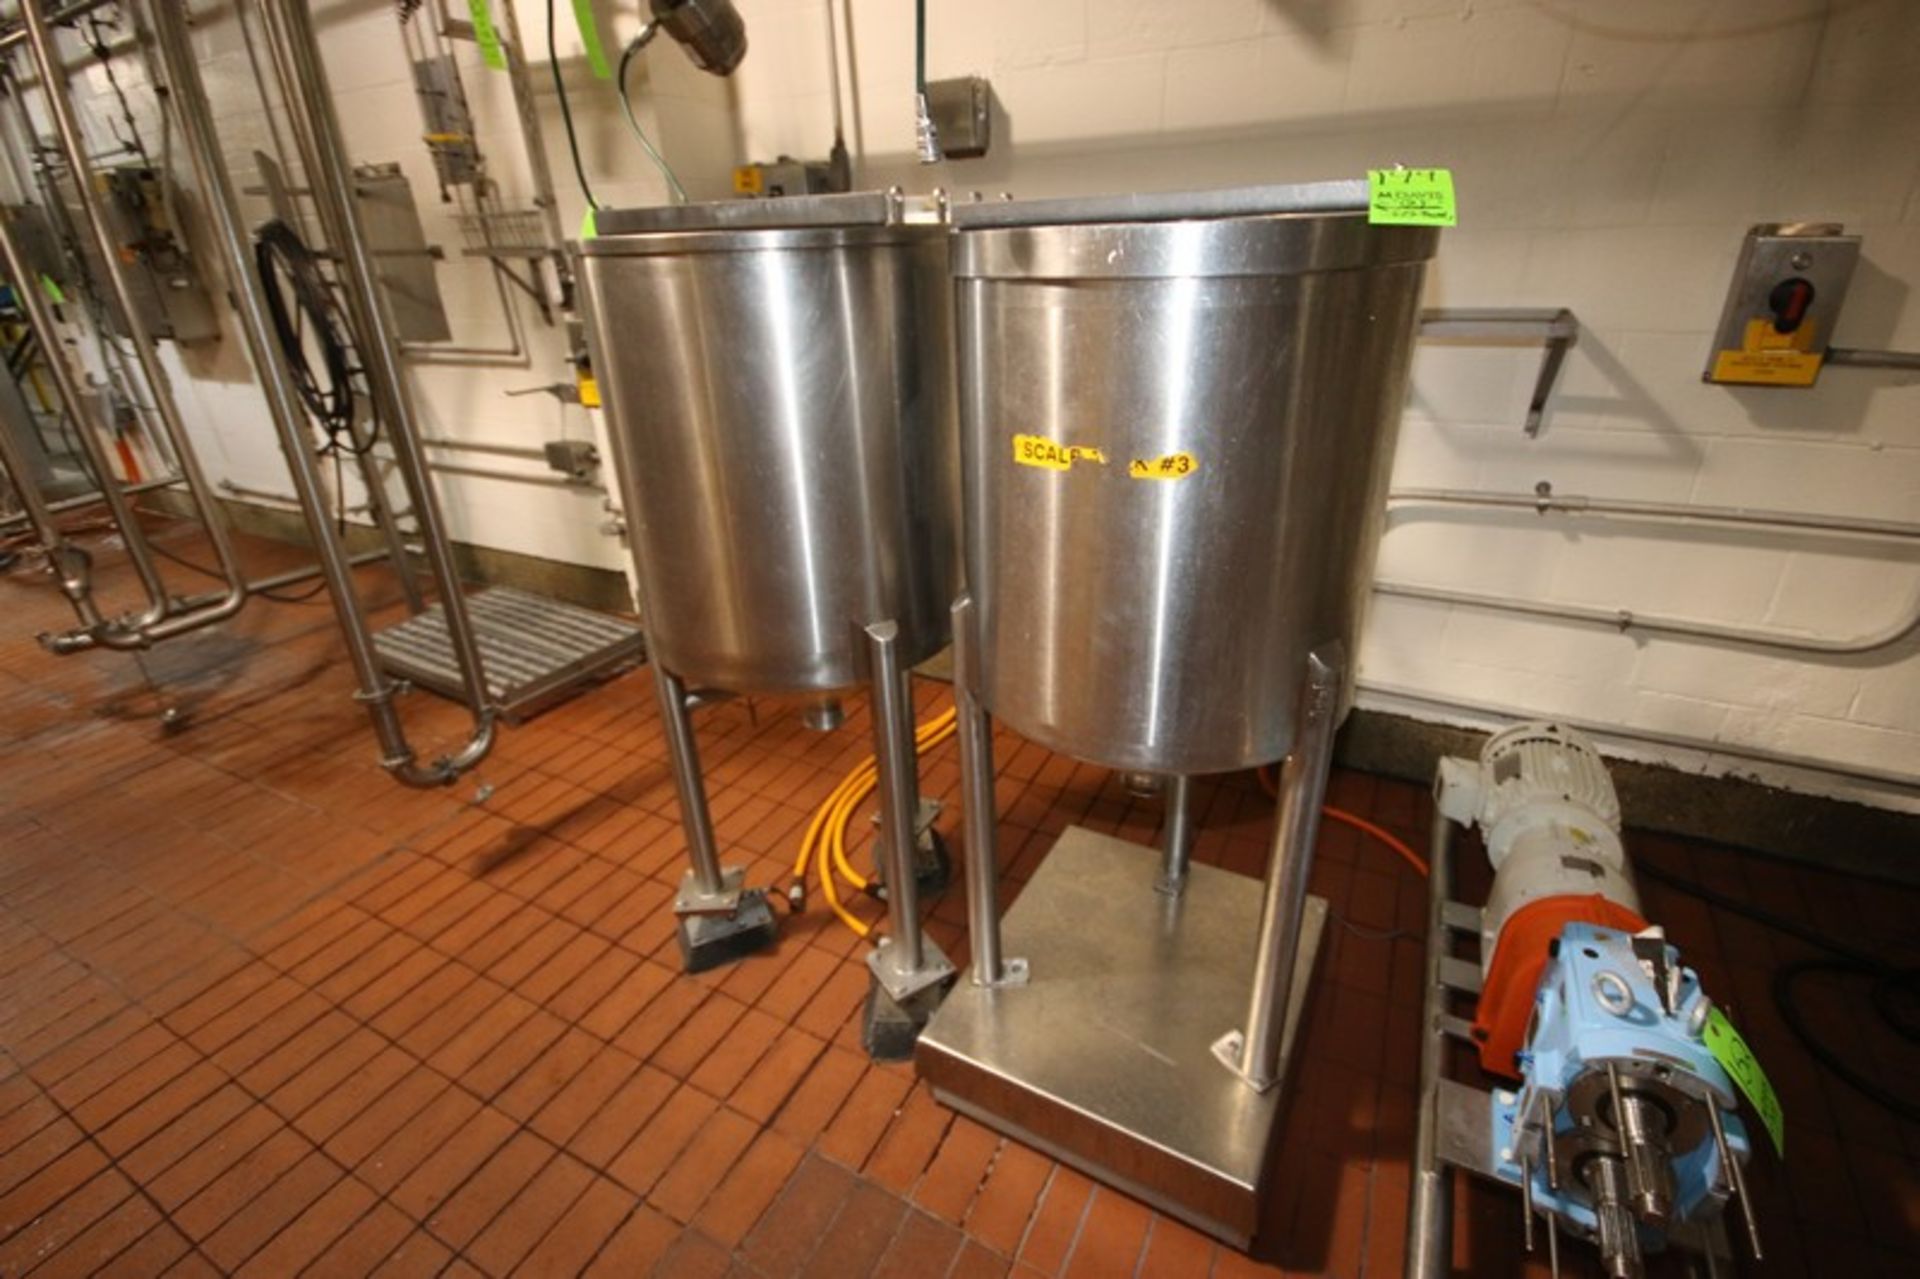 (2) S/S Single Wall Scale Tanks,1-2013 DCI 50 Gal. S/S Single Wall Tank, Vessel MAWP 0 PSI @ 100 - Image 4 of 8